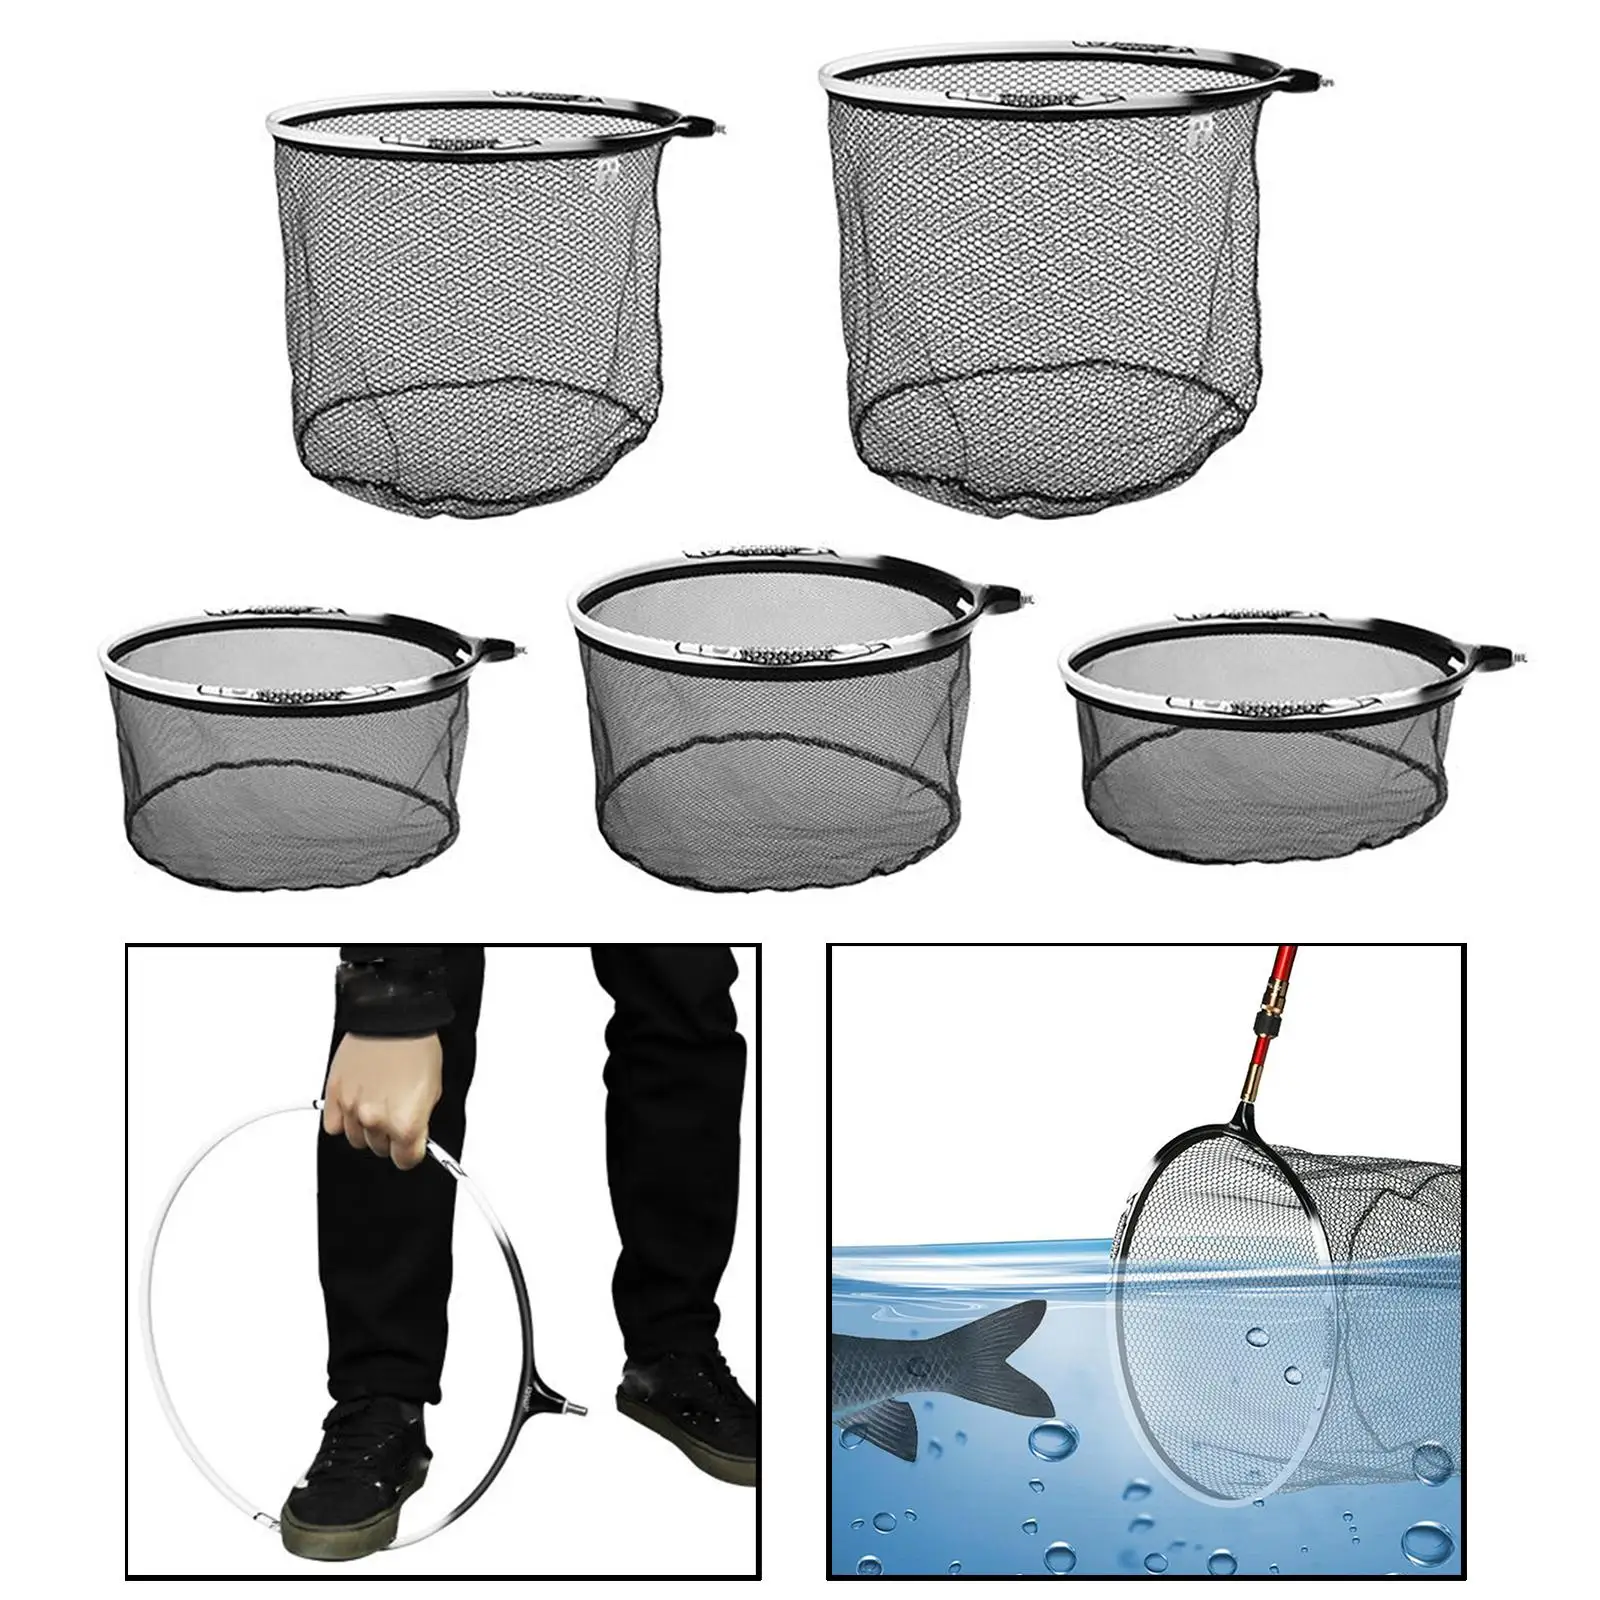 Floating  for Steelhead, Salmon, Fly, Kayak, Catfish, Bass, Trout Fishing, Rubber Coated Landing Net for , Compact